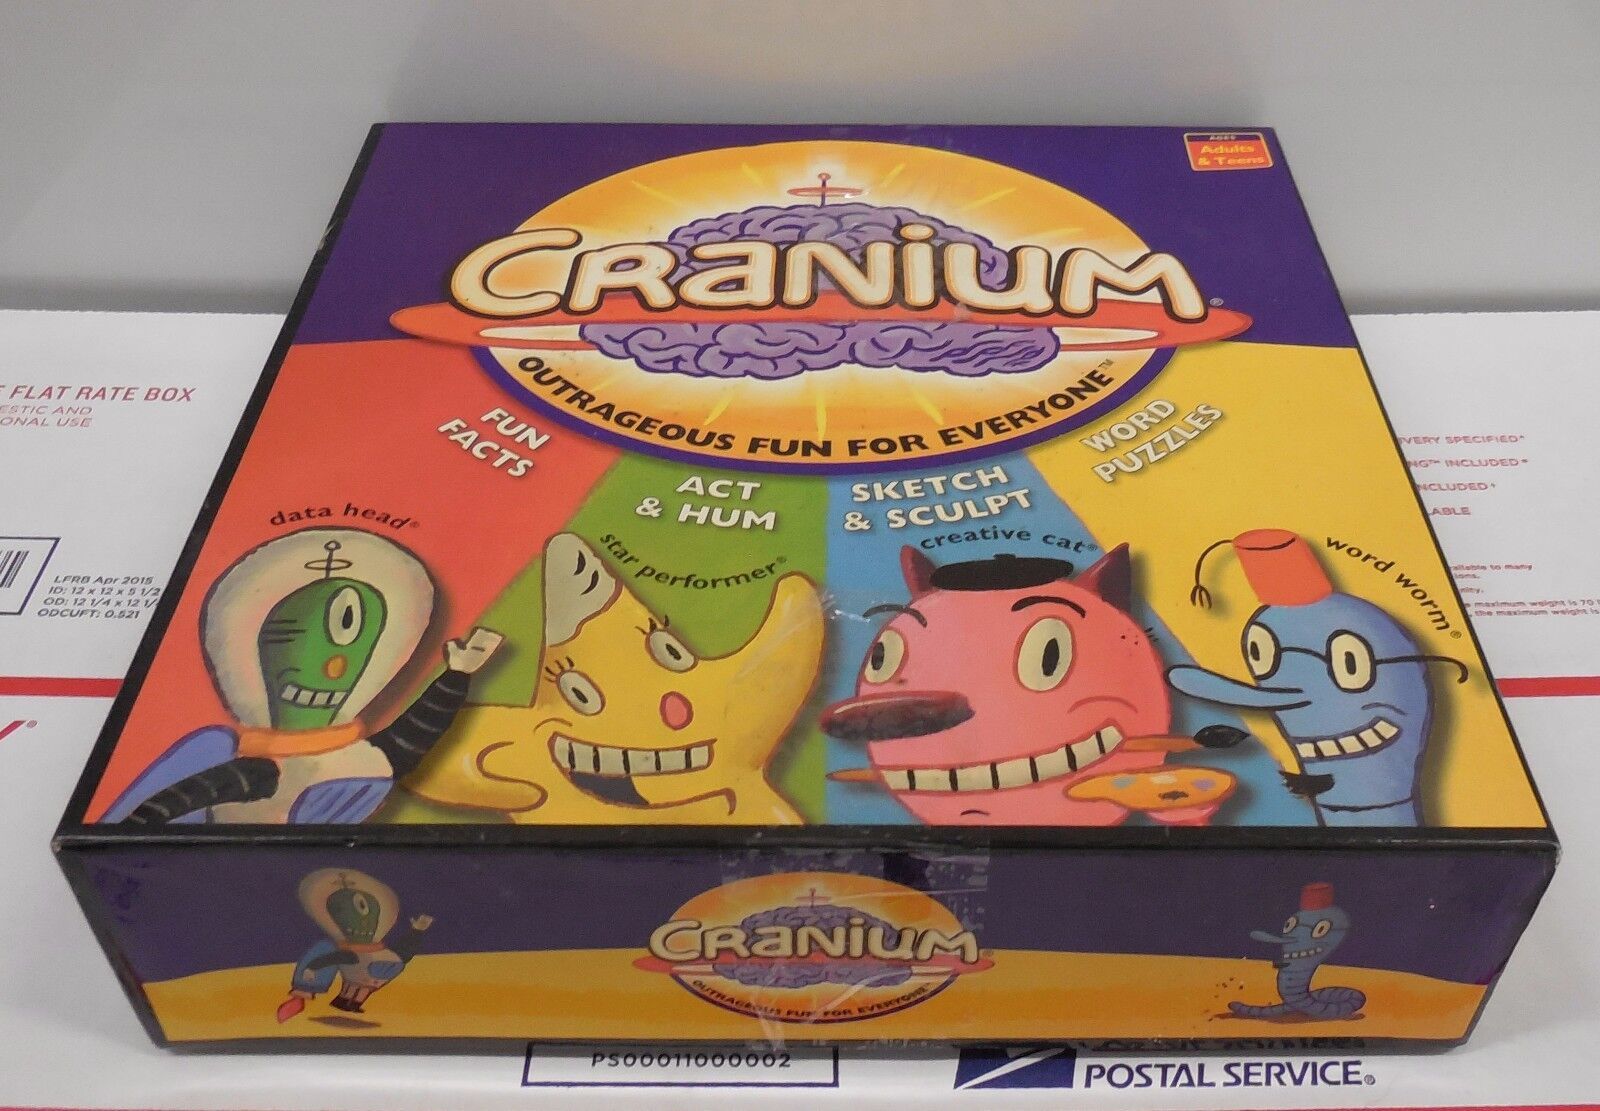 CRANIUM THE GAME FOR YOUR WHOLE BRAIN BY CRANIUM  TEEN TO ADULT - $9.65